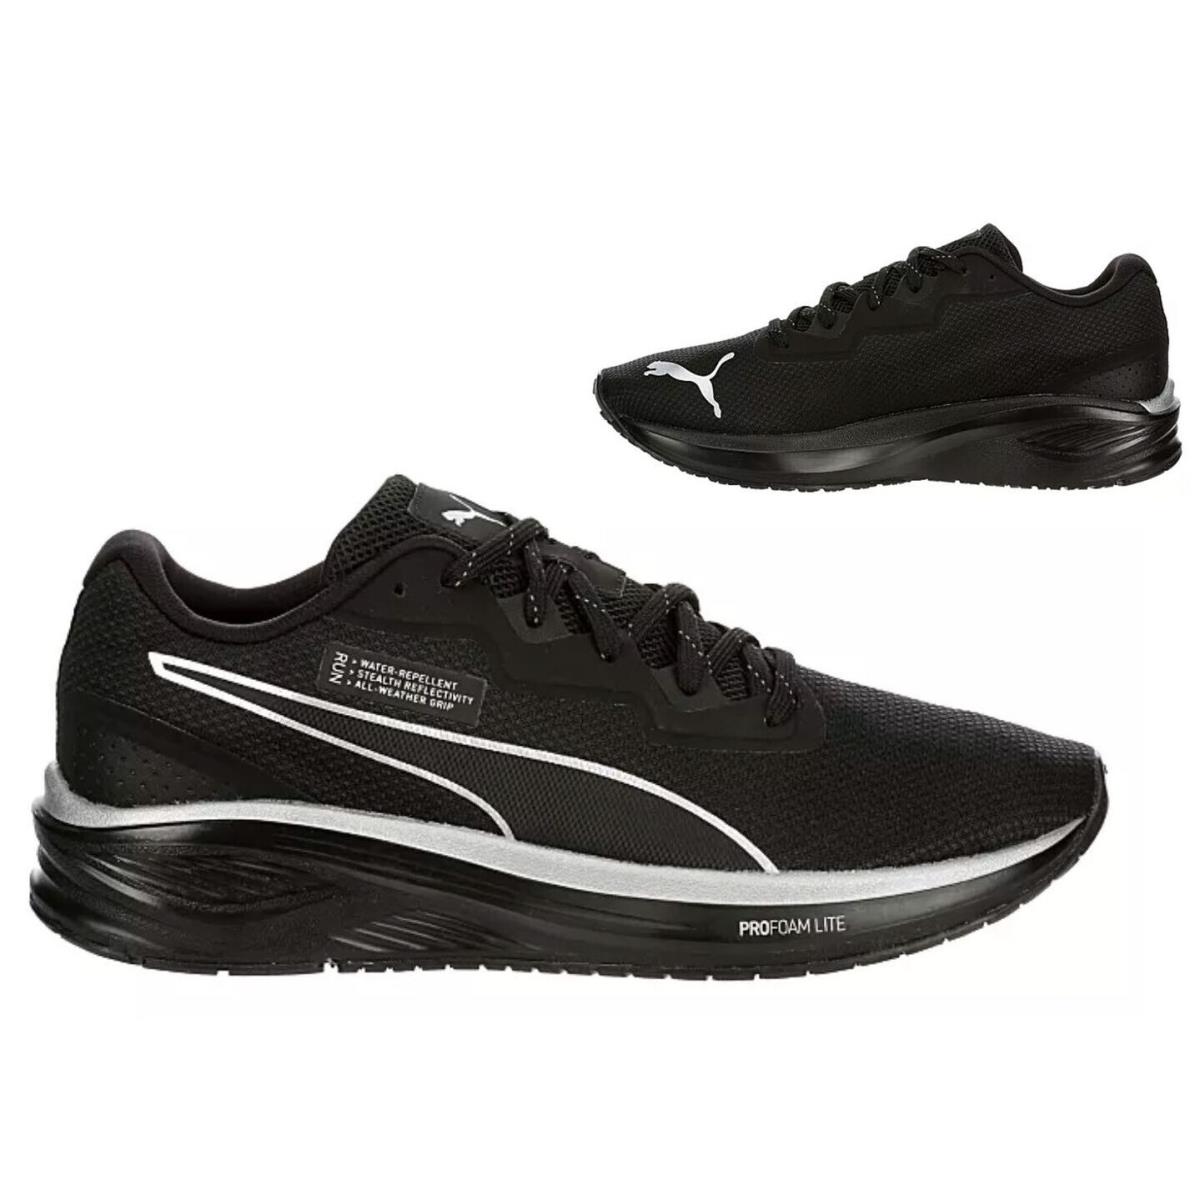 Puma Casual Shoes Lace Up Athletic Sneakers Mens Black Silver All Sizes